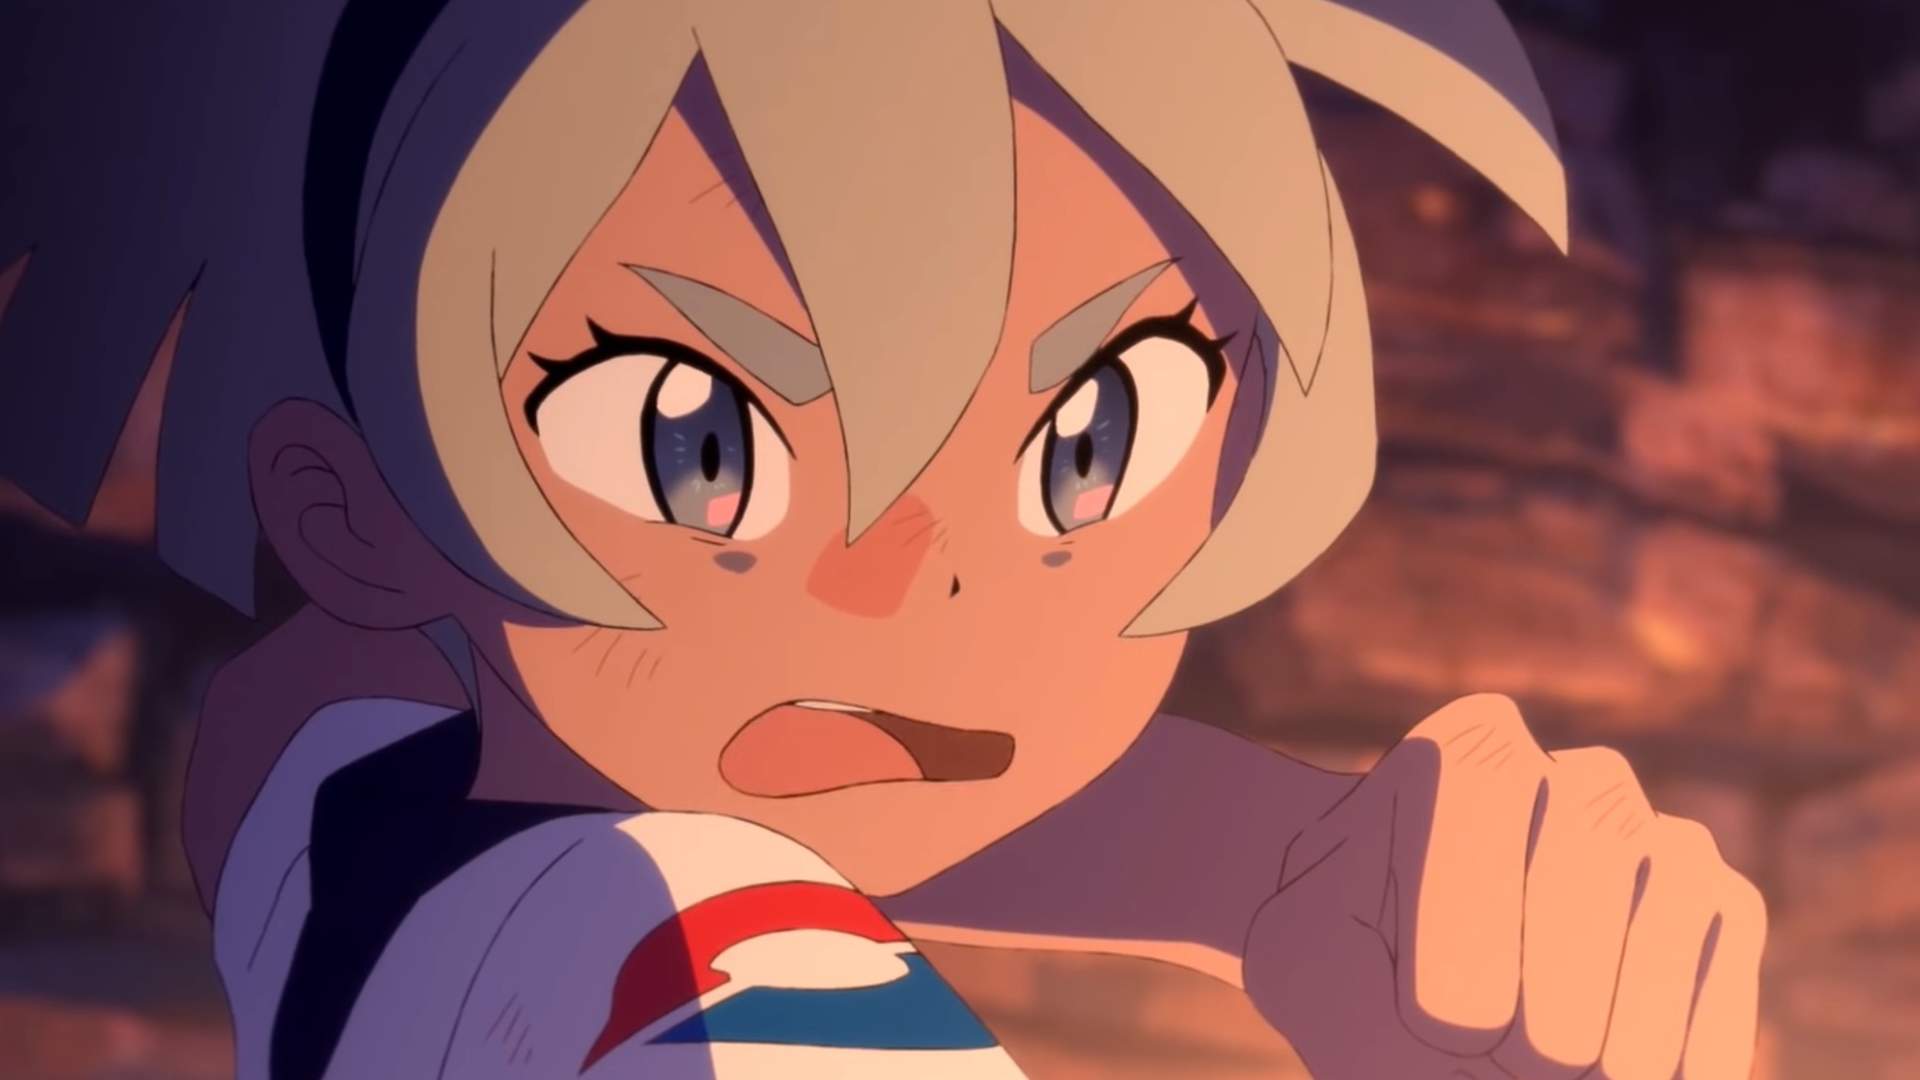 The New Pokemon: Twilight Wings Short Shows Us a Side of Pokemon We Don't Get to See Often